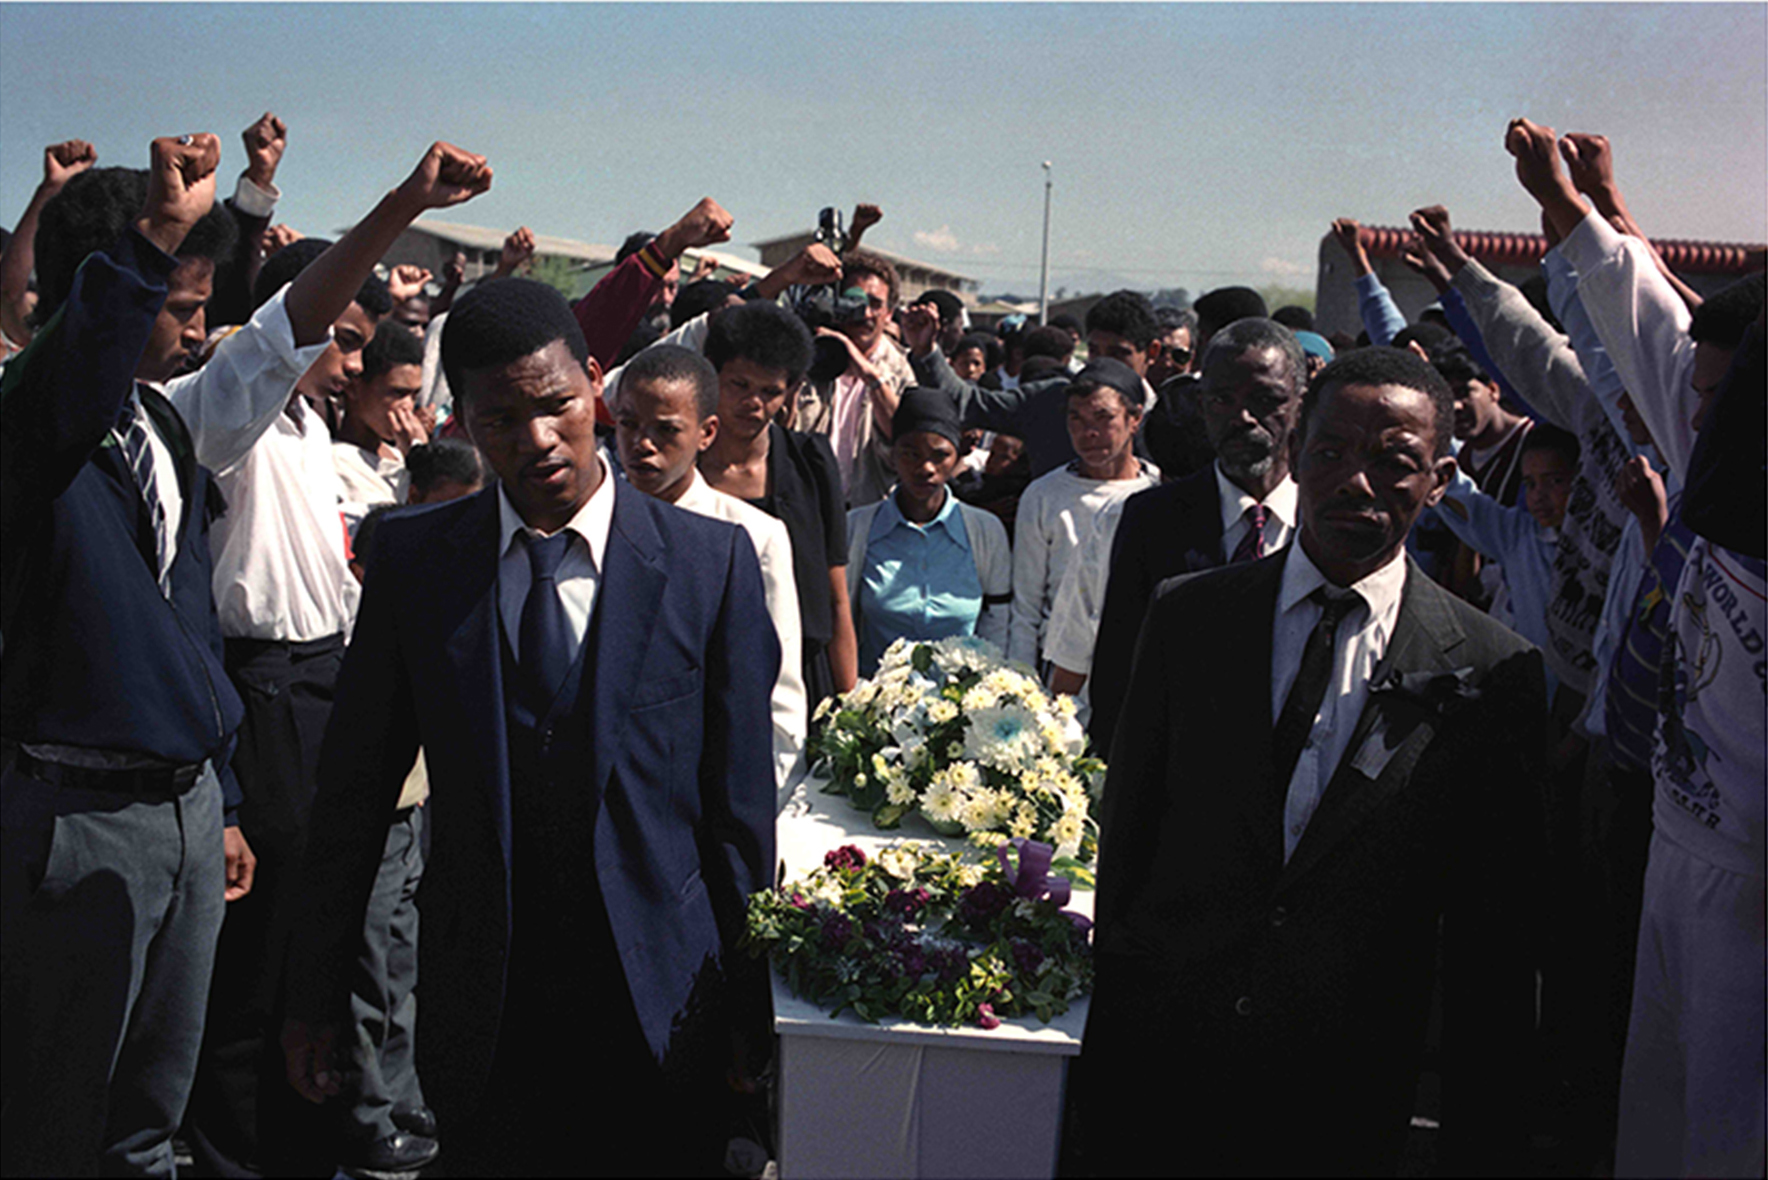 Funeral of a murdered student in Kleinvlei in the Western Cape.